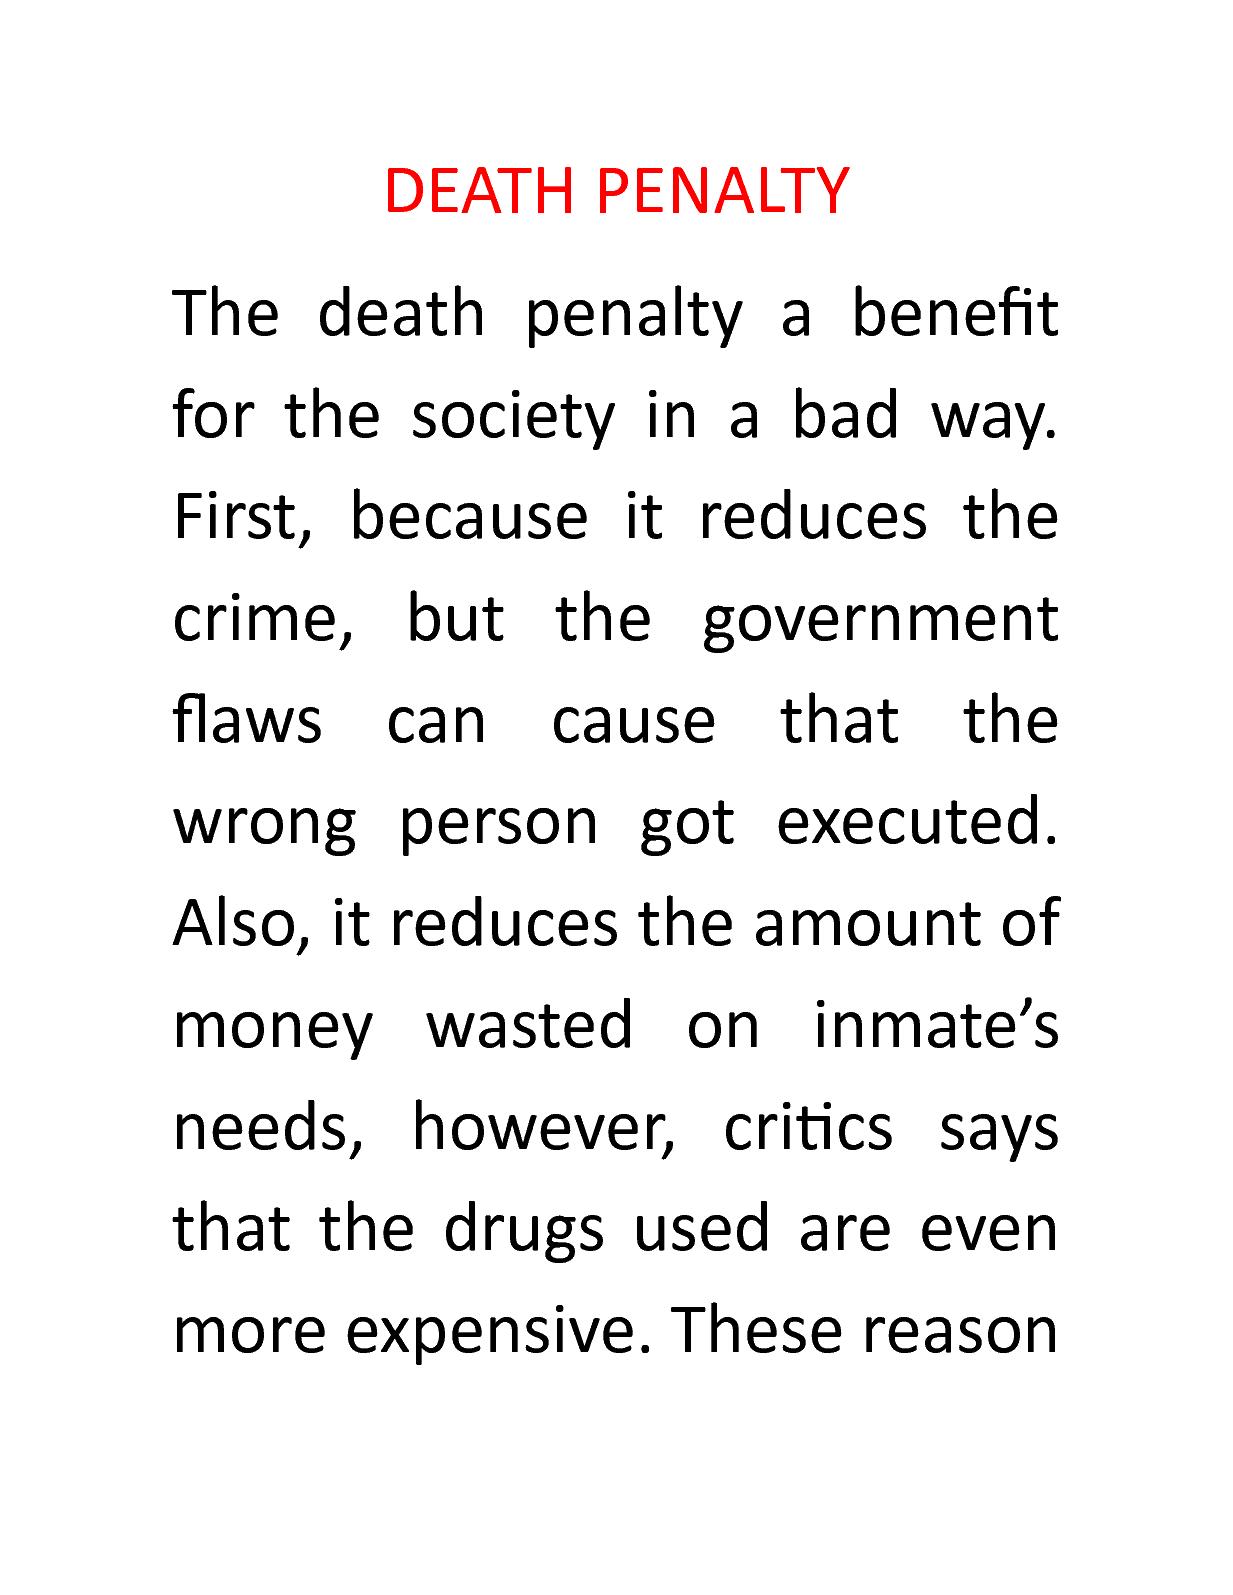 Essays about the death penalty